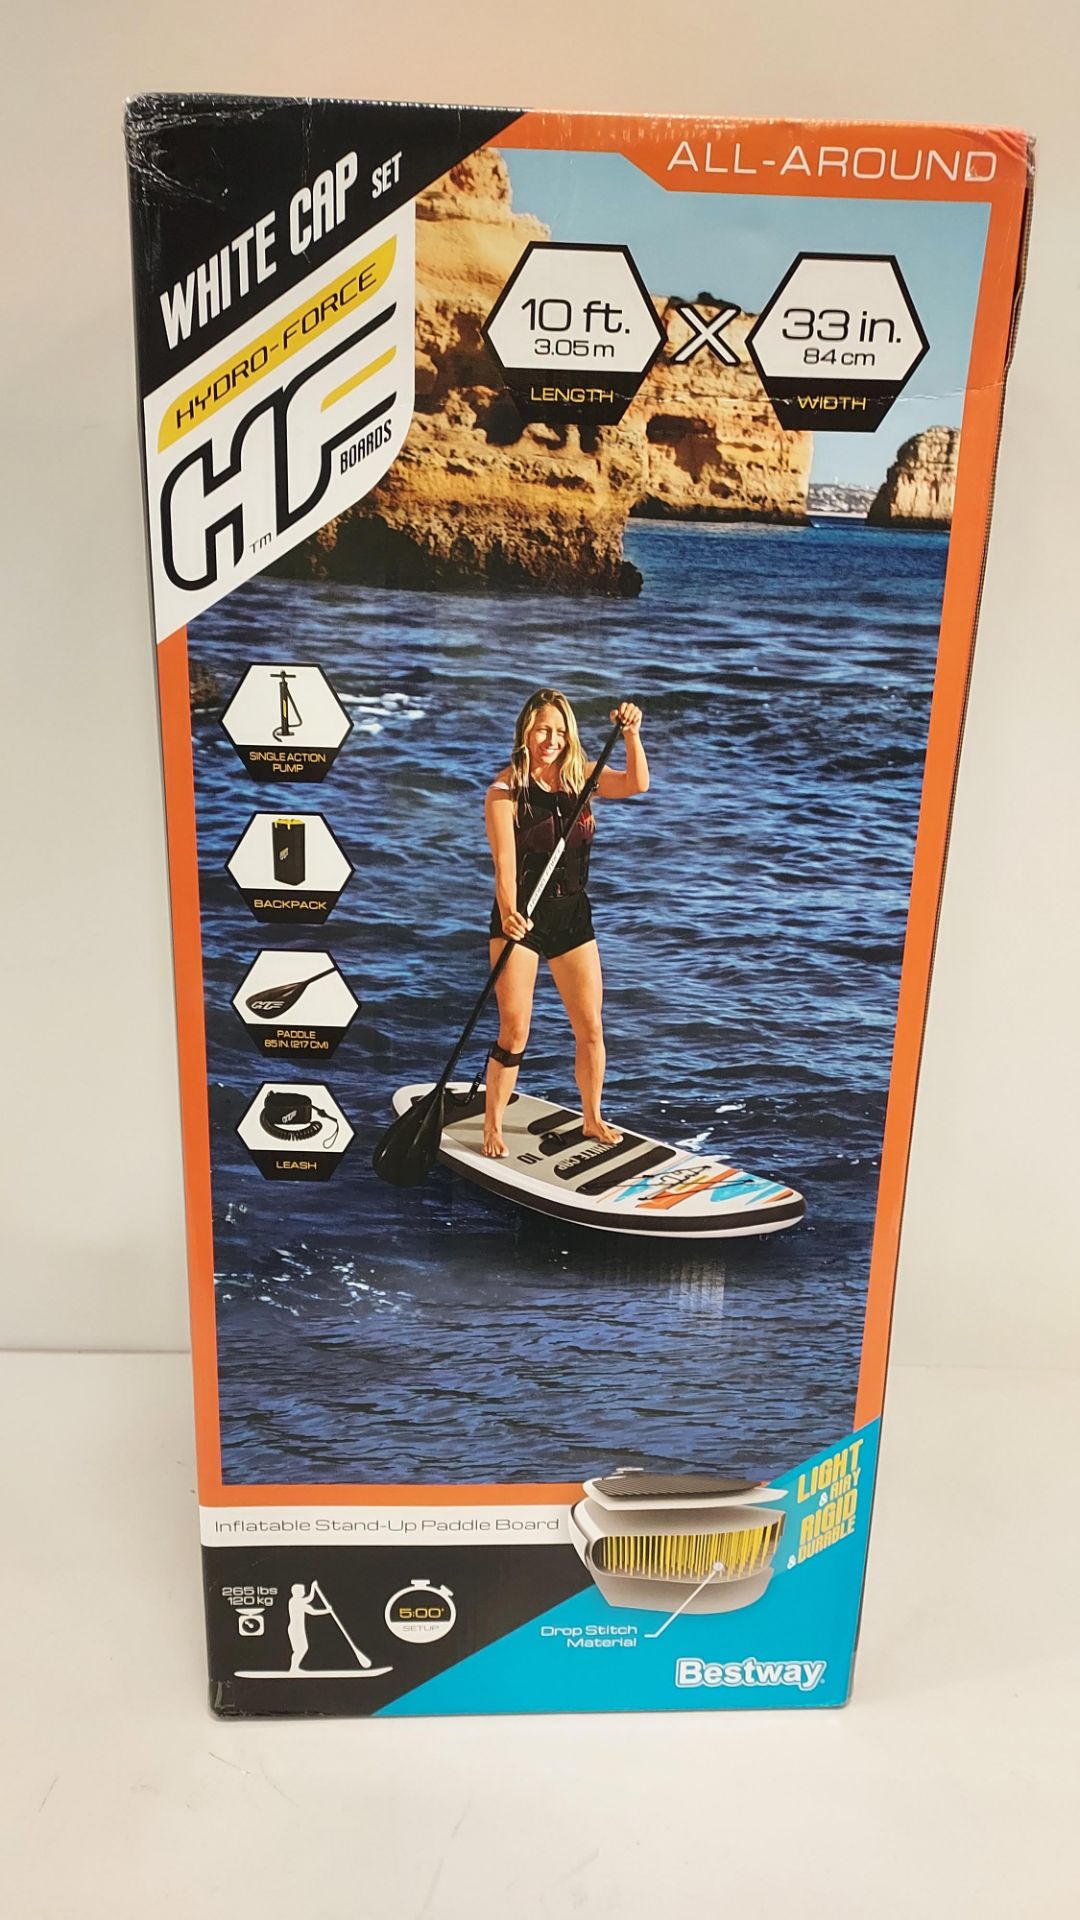 BRAND NEW BESTWAY WHITE CAP 10FT INFLATABLE STAND UP PADDLEBOARD SET CONSISTING OF PADDLEBOARD,